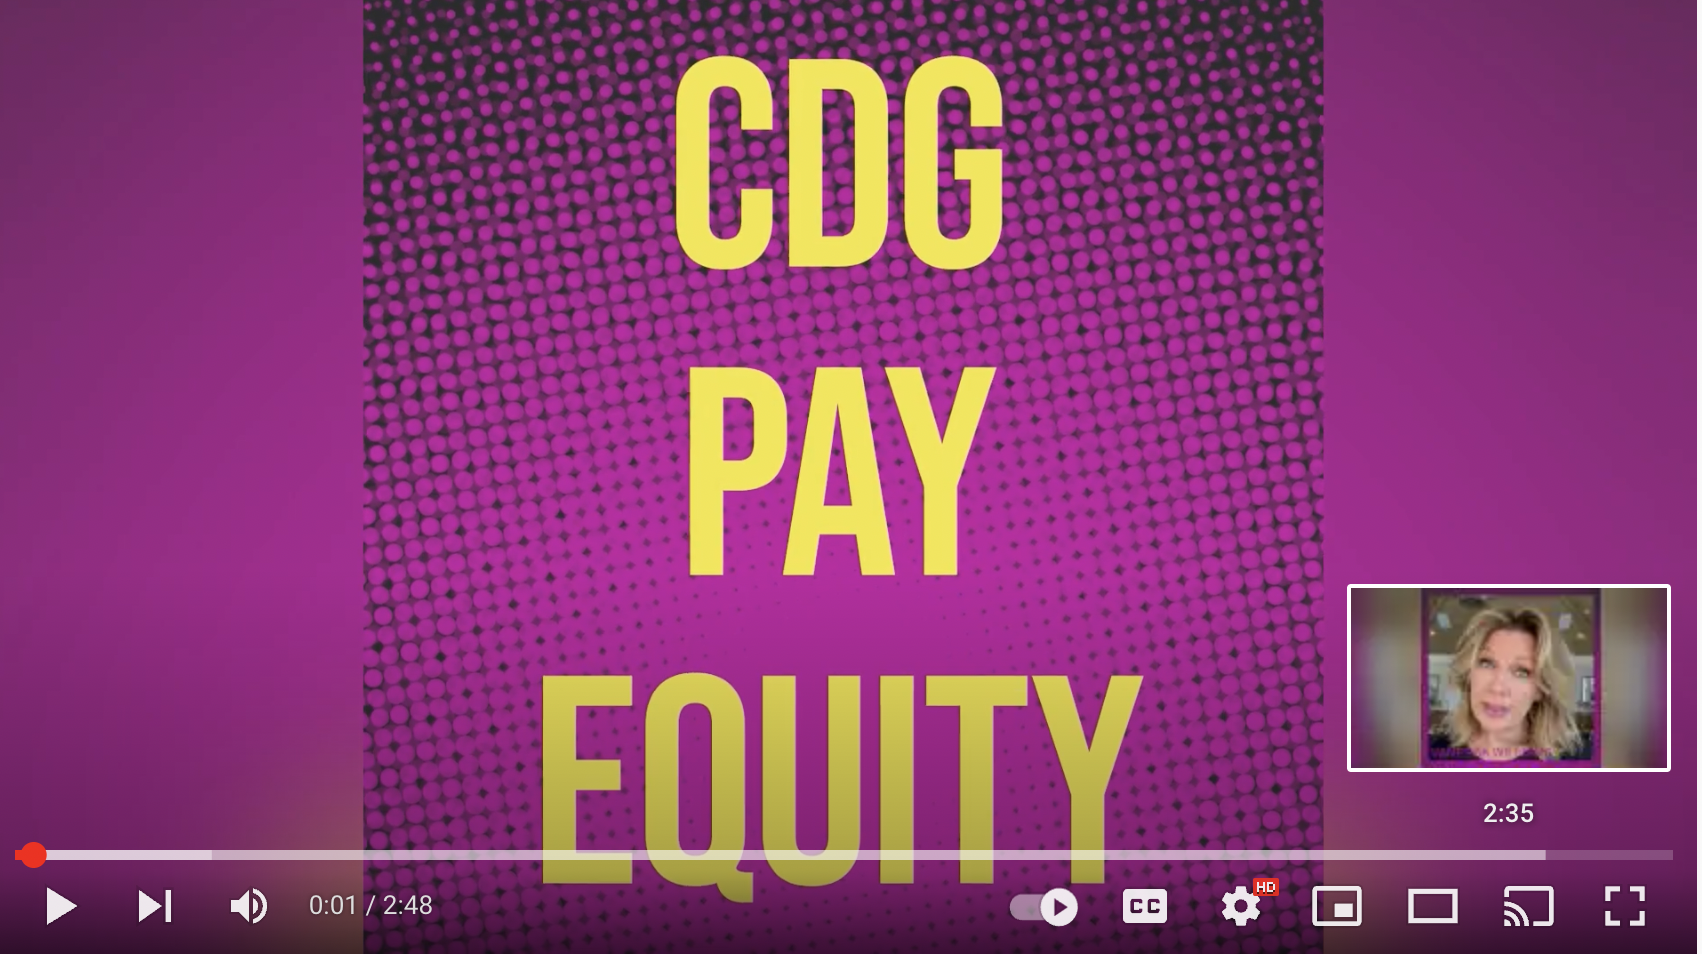 Screenshot from a youtube video, reading "CDG Pay Equity"